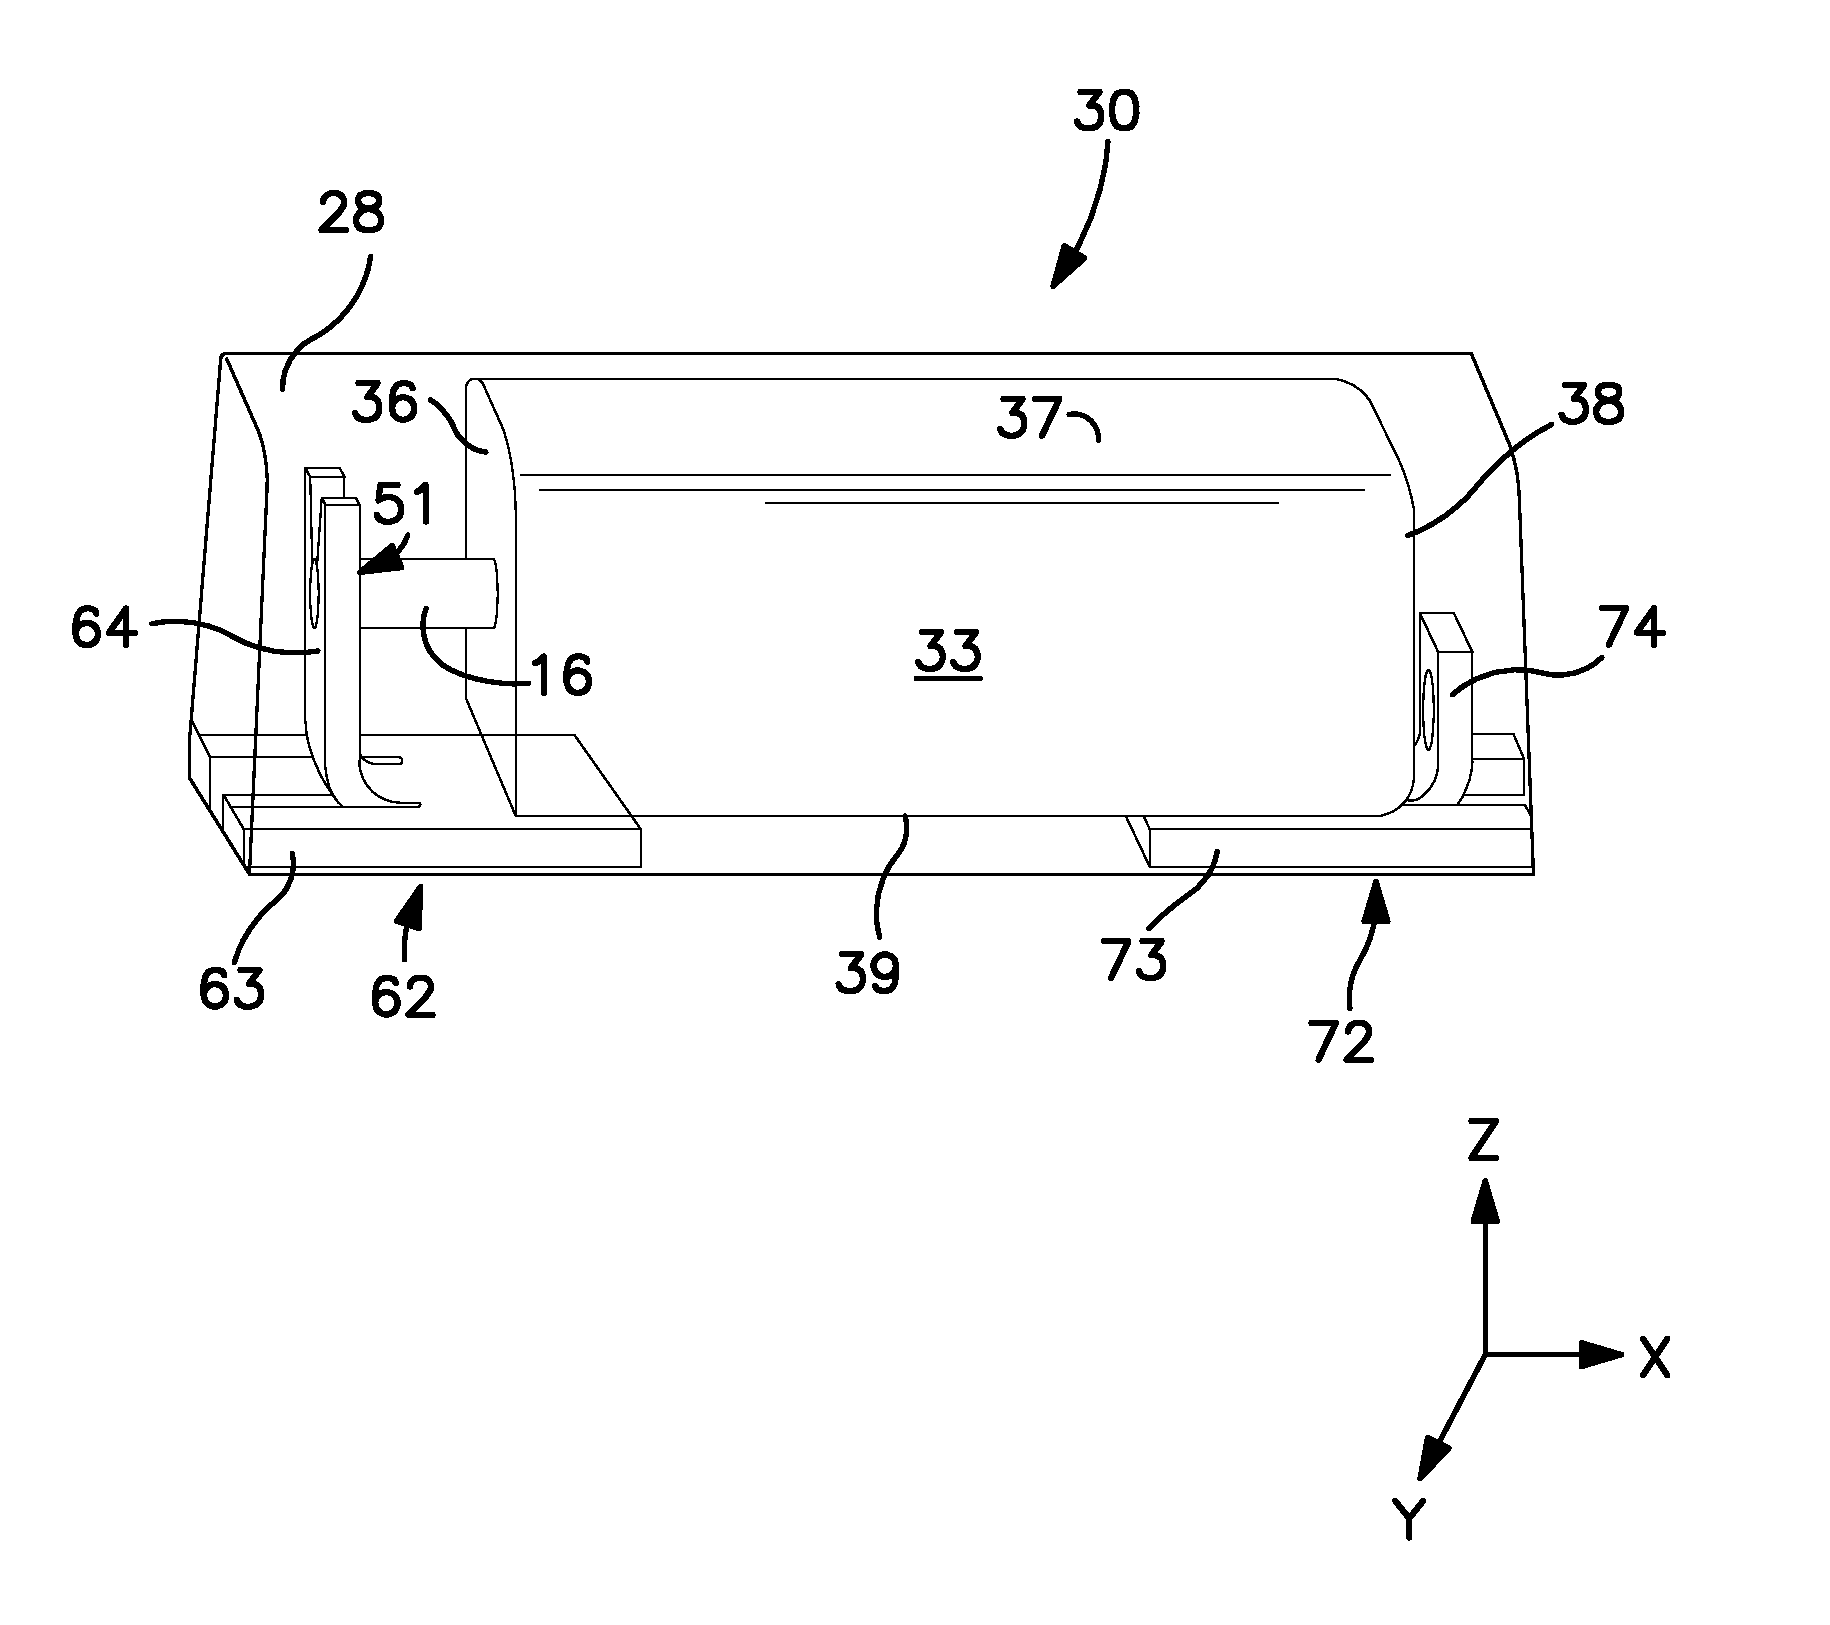 Solid electrolytic capacitor containing an improved manganese oxide electrolyte